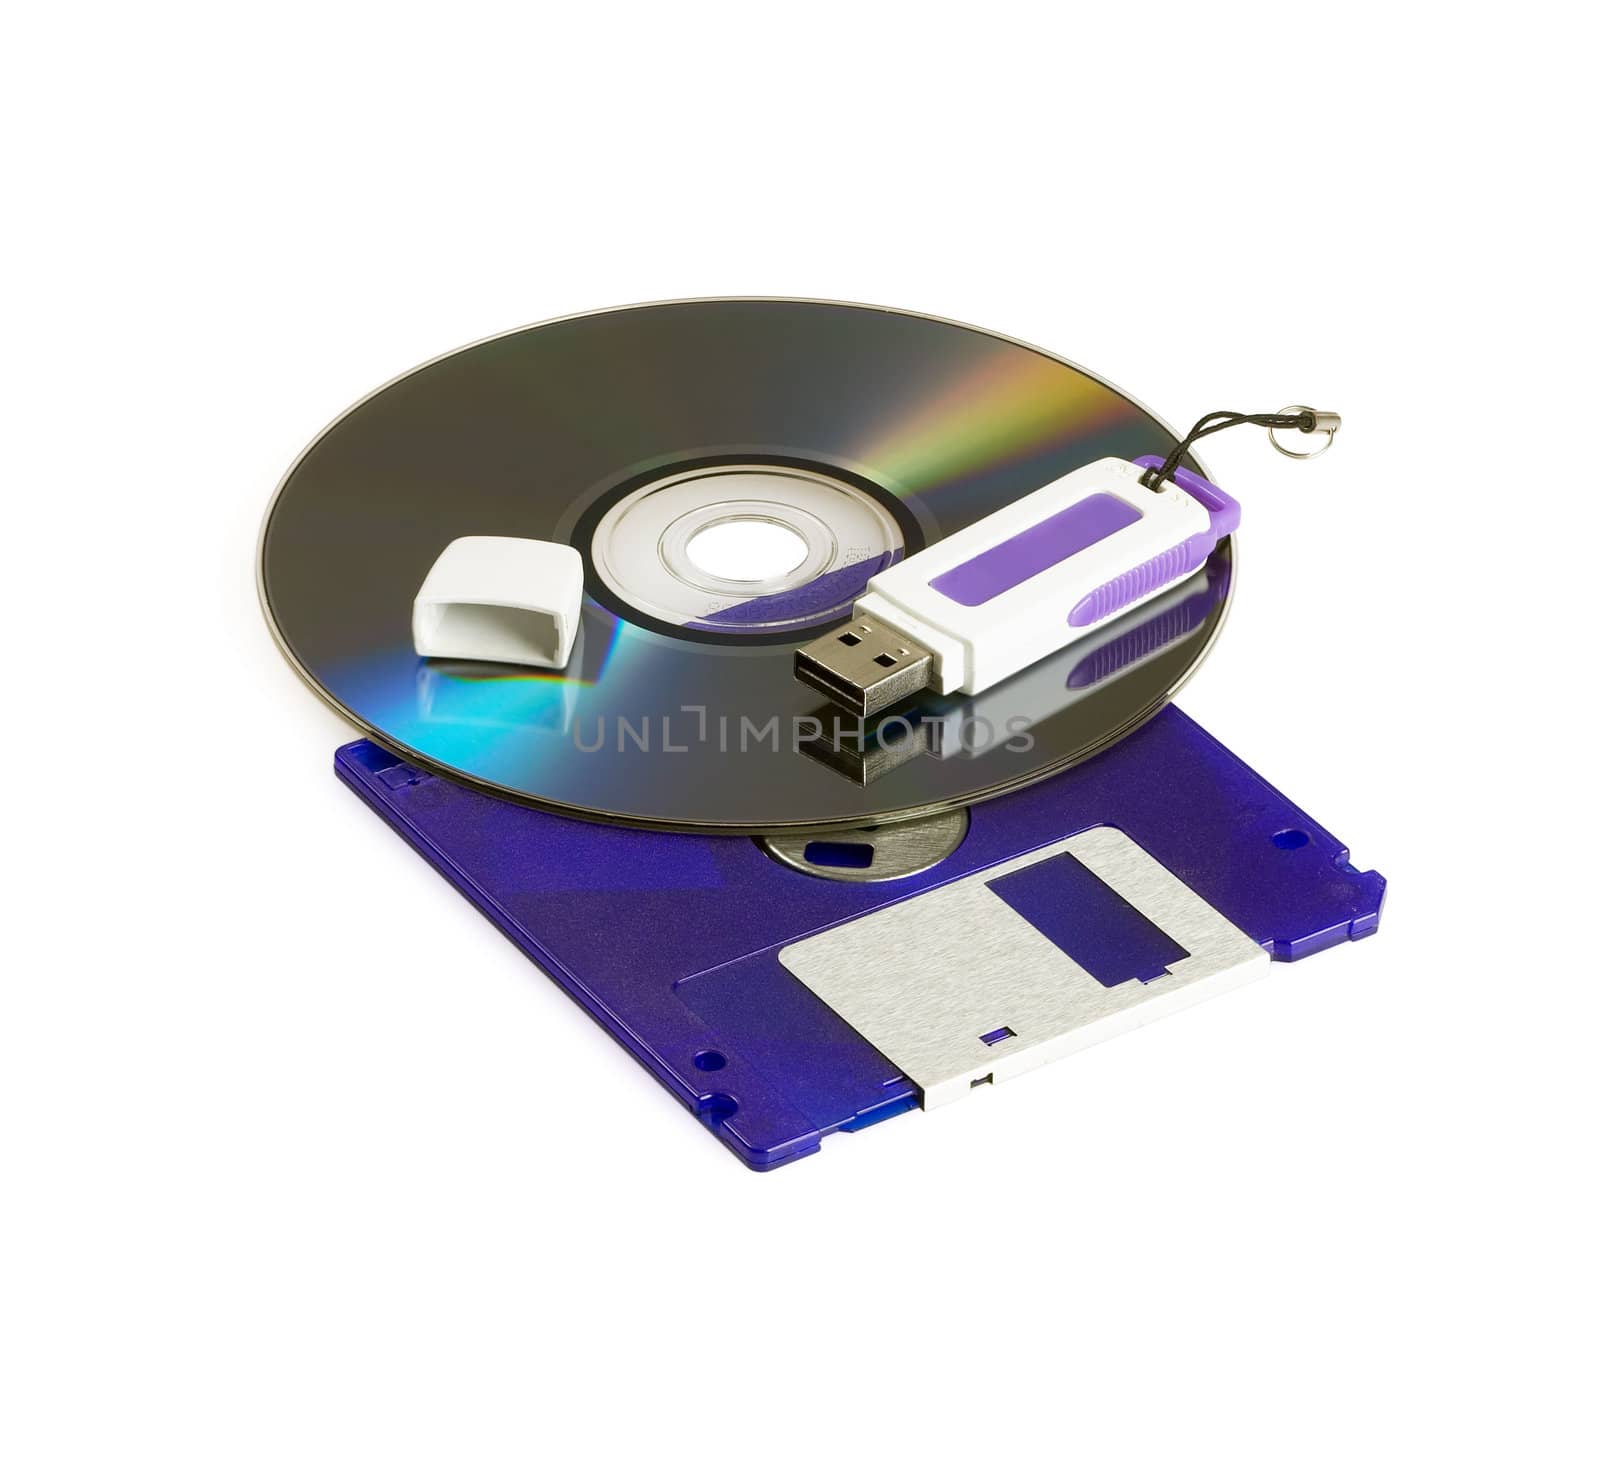 cd rom dvd,floppy disk ,and usb key isolated on white background